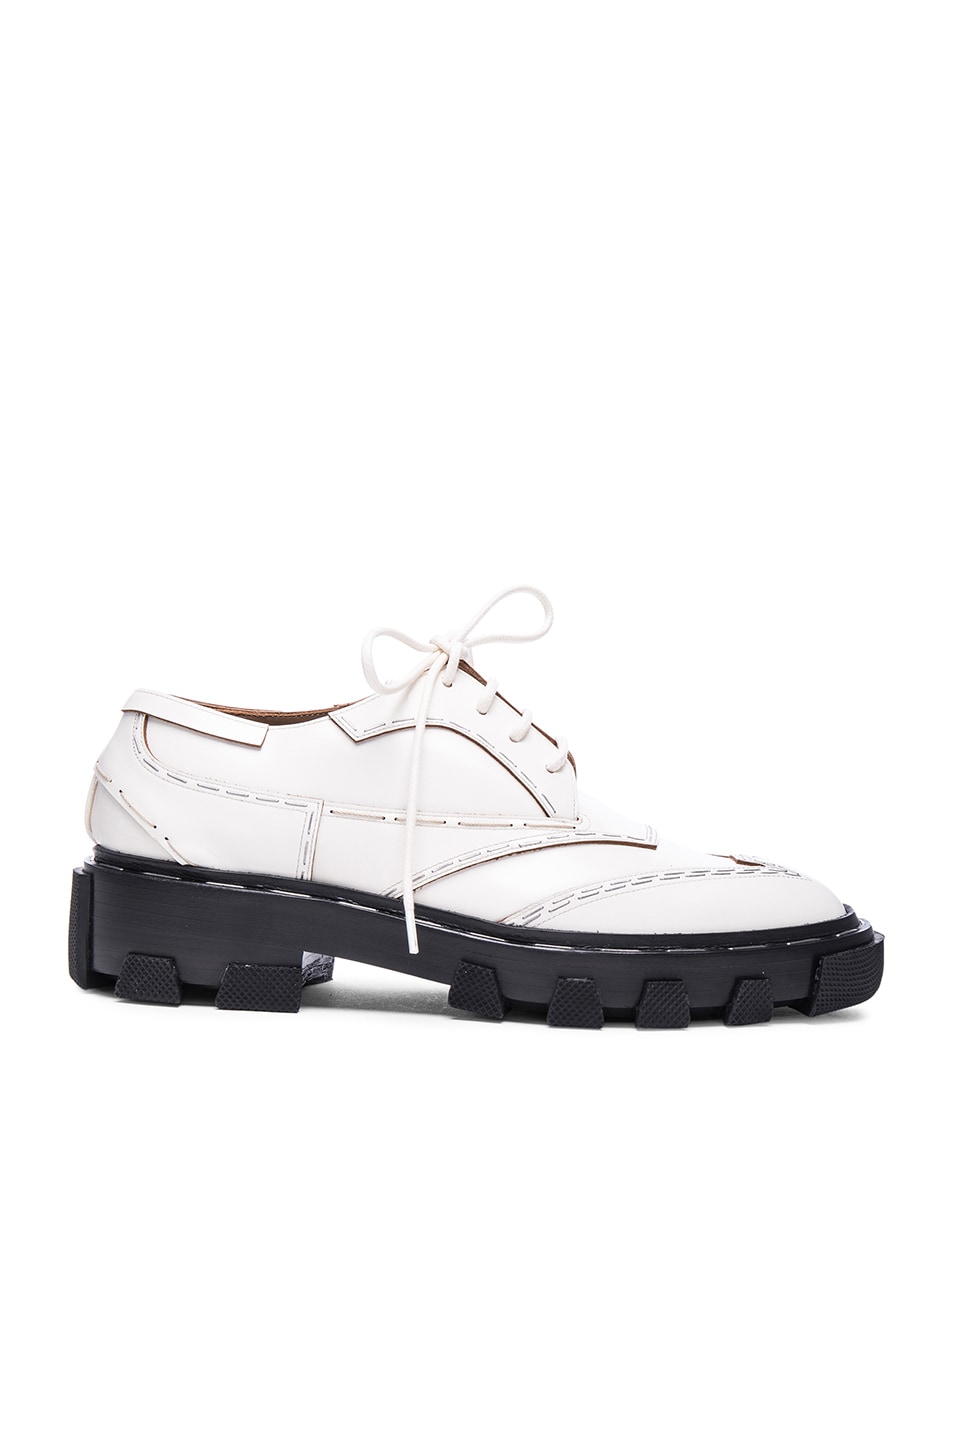 Image 1 of Balenciaga Shiny Leather Derbies in White